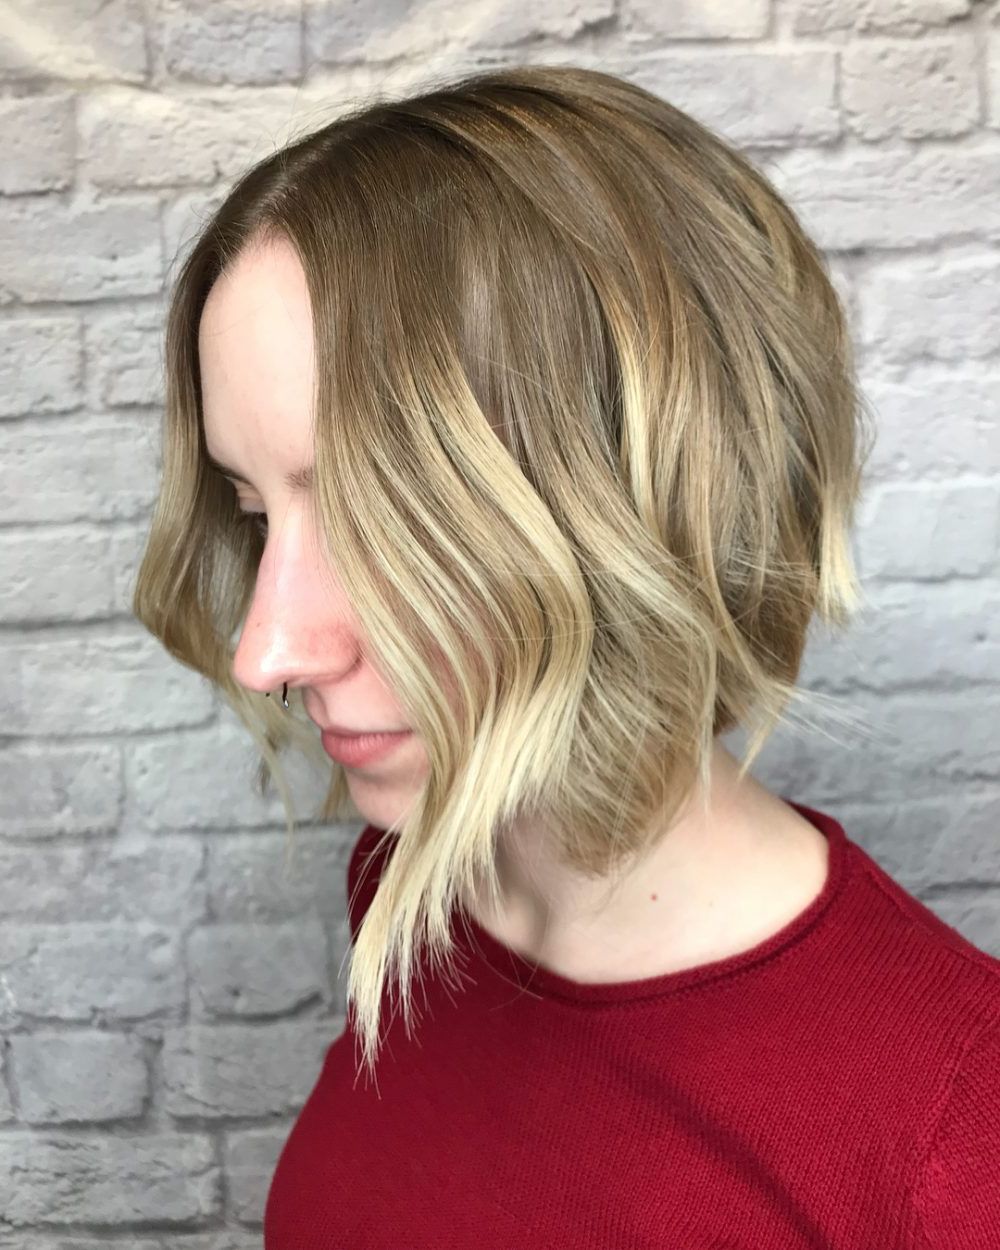 24 Flattering Middle Part Hairstyles In 2019 Throughout Favorite Middle Parting Long Hairstyles With Choppy Layers (View 19 of 20)